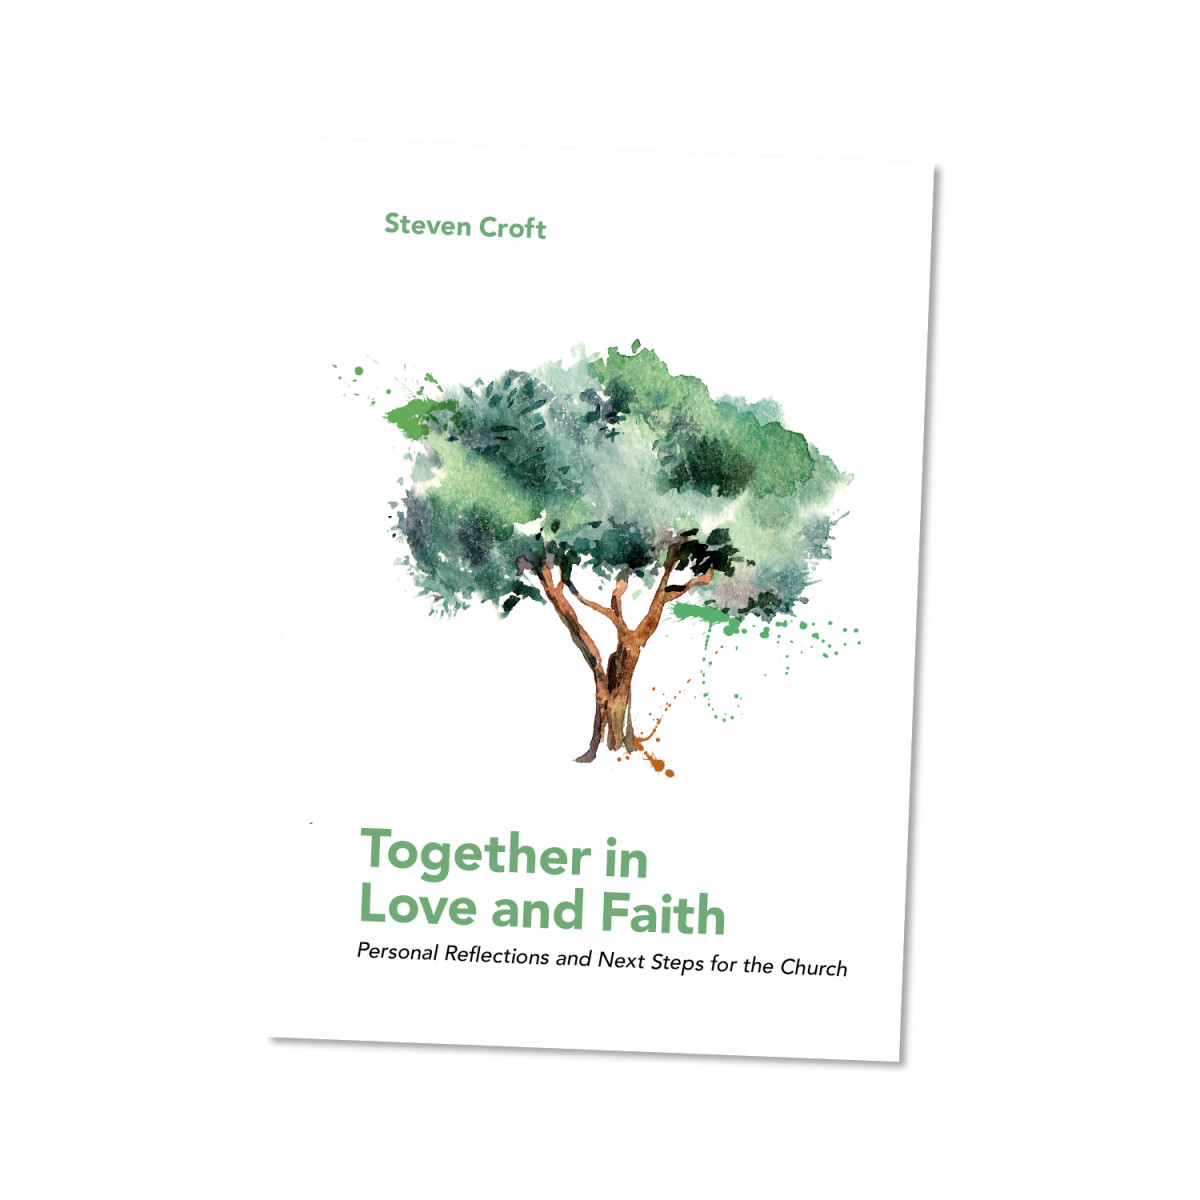 Cover of Together in Love and Faith, Bishop Steven Croft's essay calling for clergy to have freedom to marry same-sex couples in the Church of England.